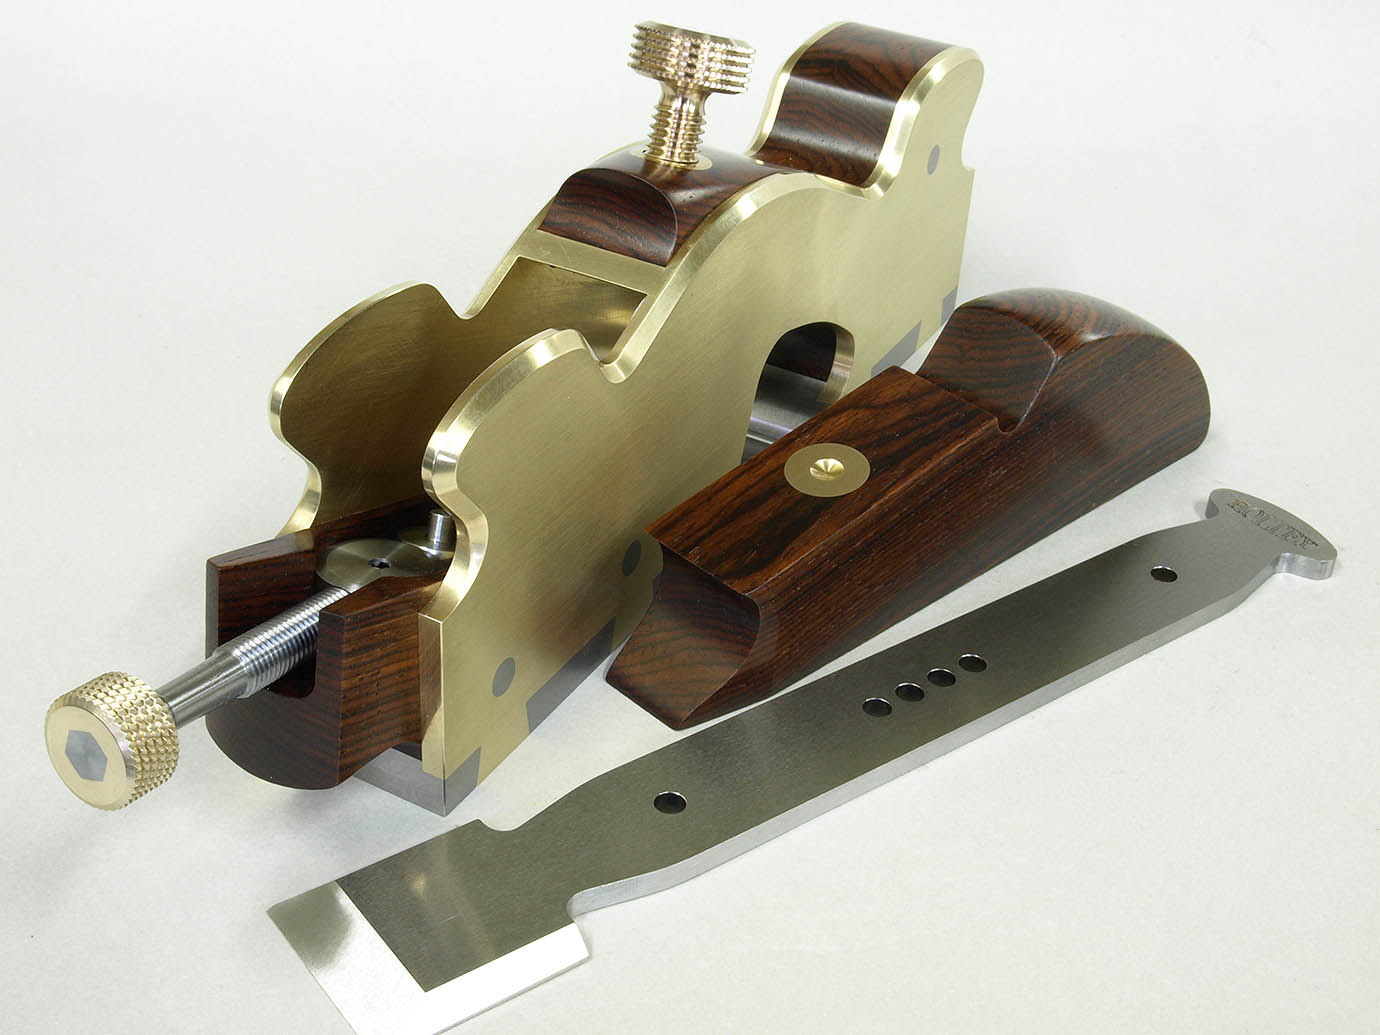 Spiers shoulder plane - with blade removed.